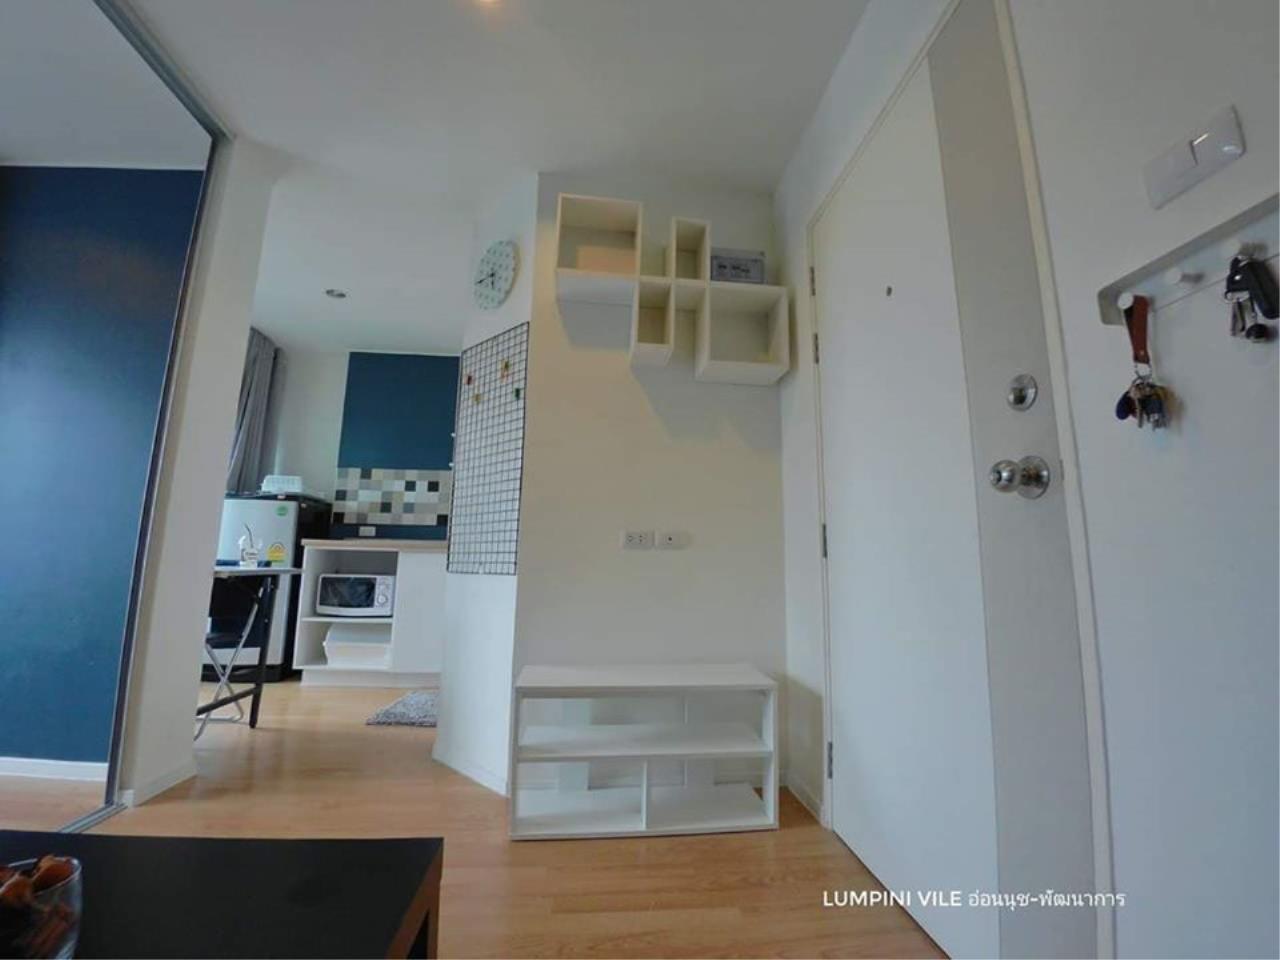 Agent Thawanrat Agency's Condo for rental LUMPINI VILLE ONNUT – PATTANAKARN Near Airport Link Hua Mak 1 bedroom,1 bathroom. size 23 sqm.Floor 8 th. fully furnished Ready to move in 1